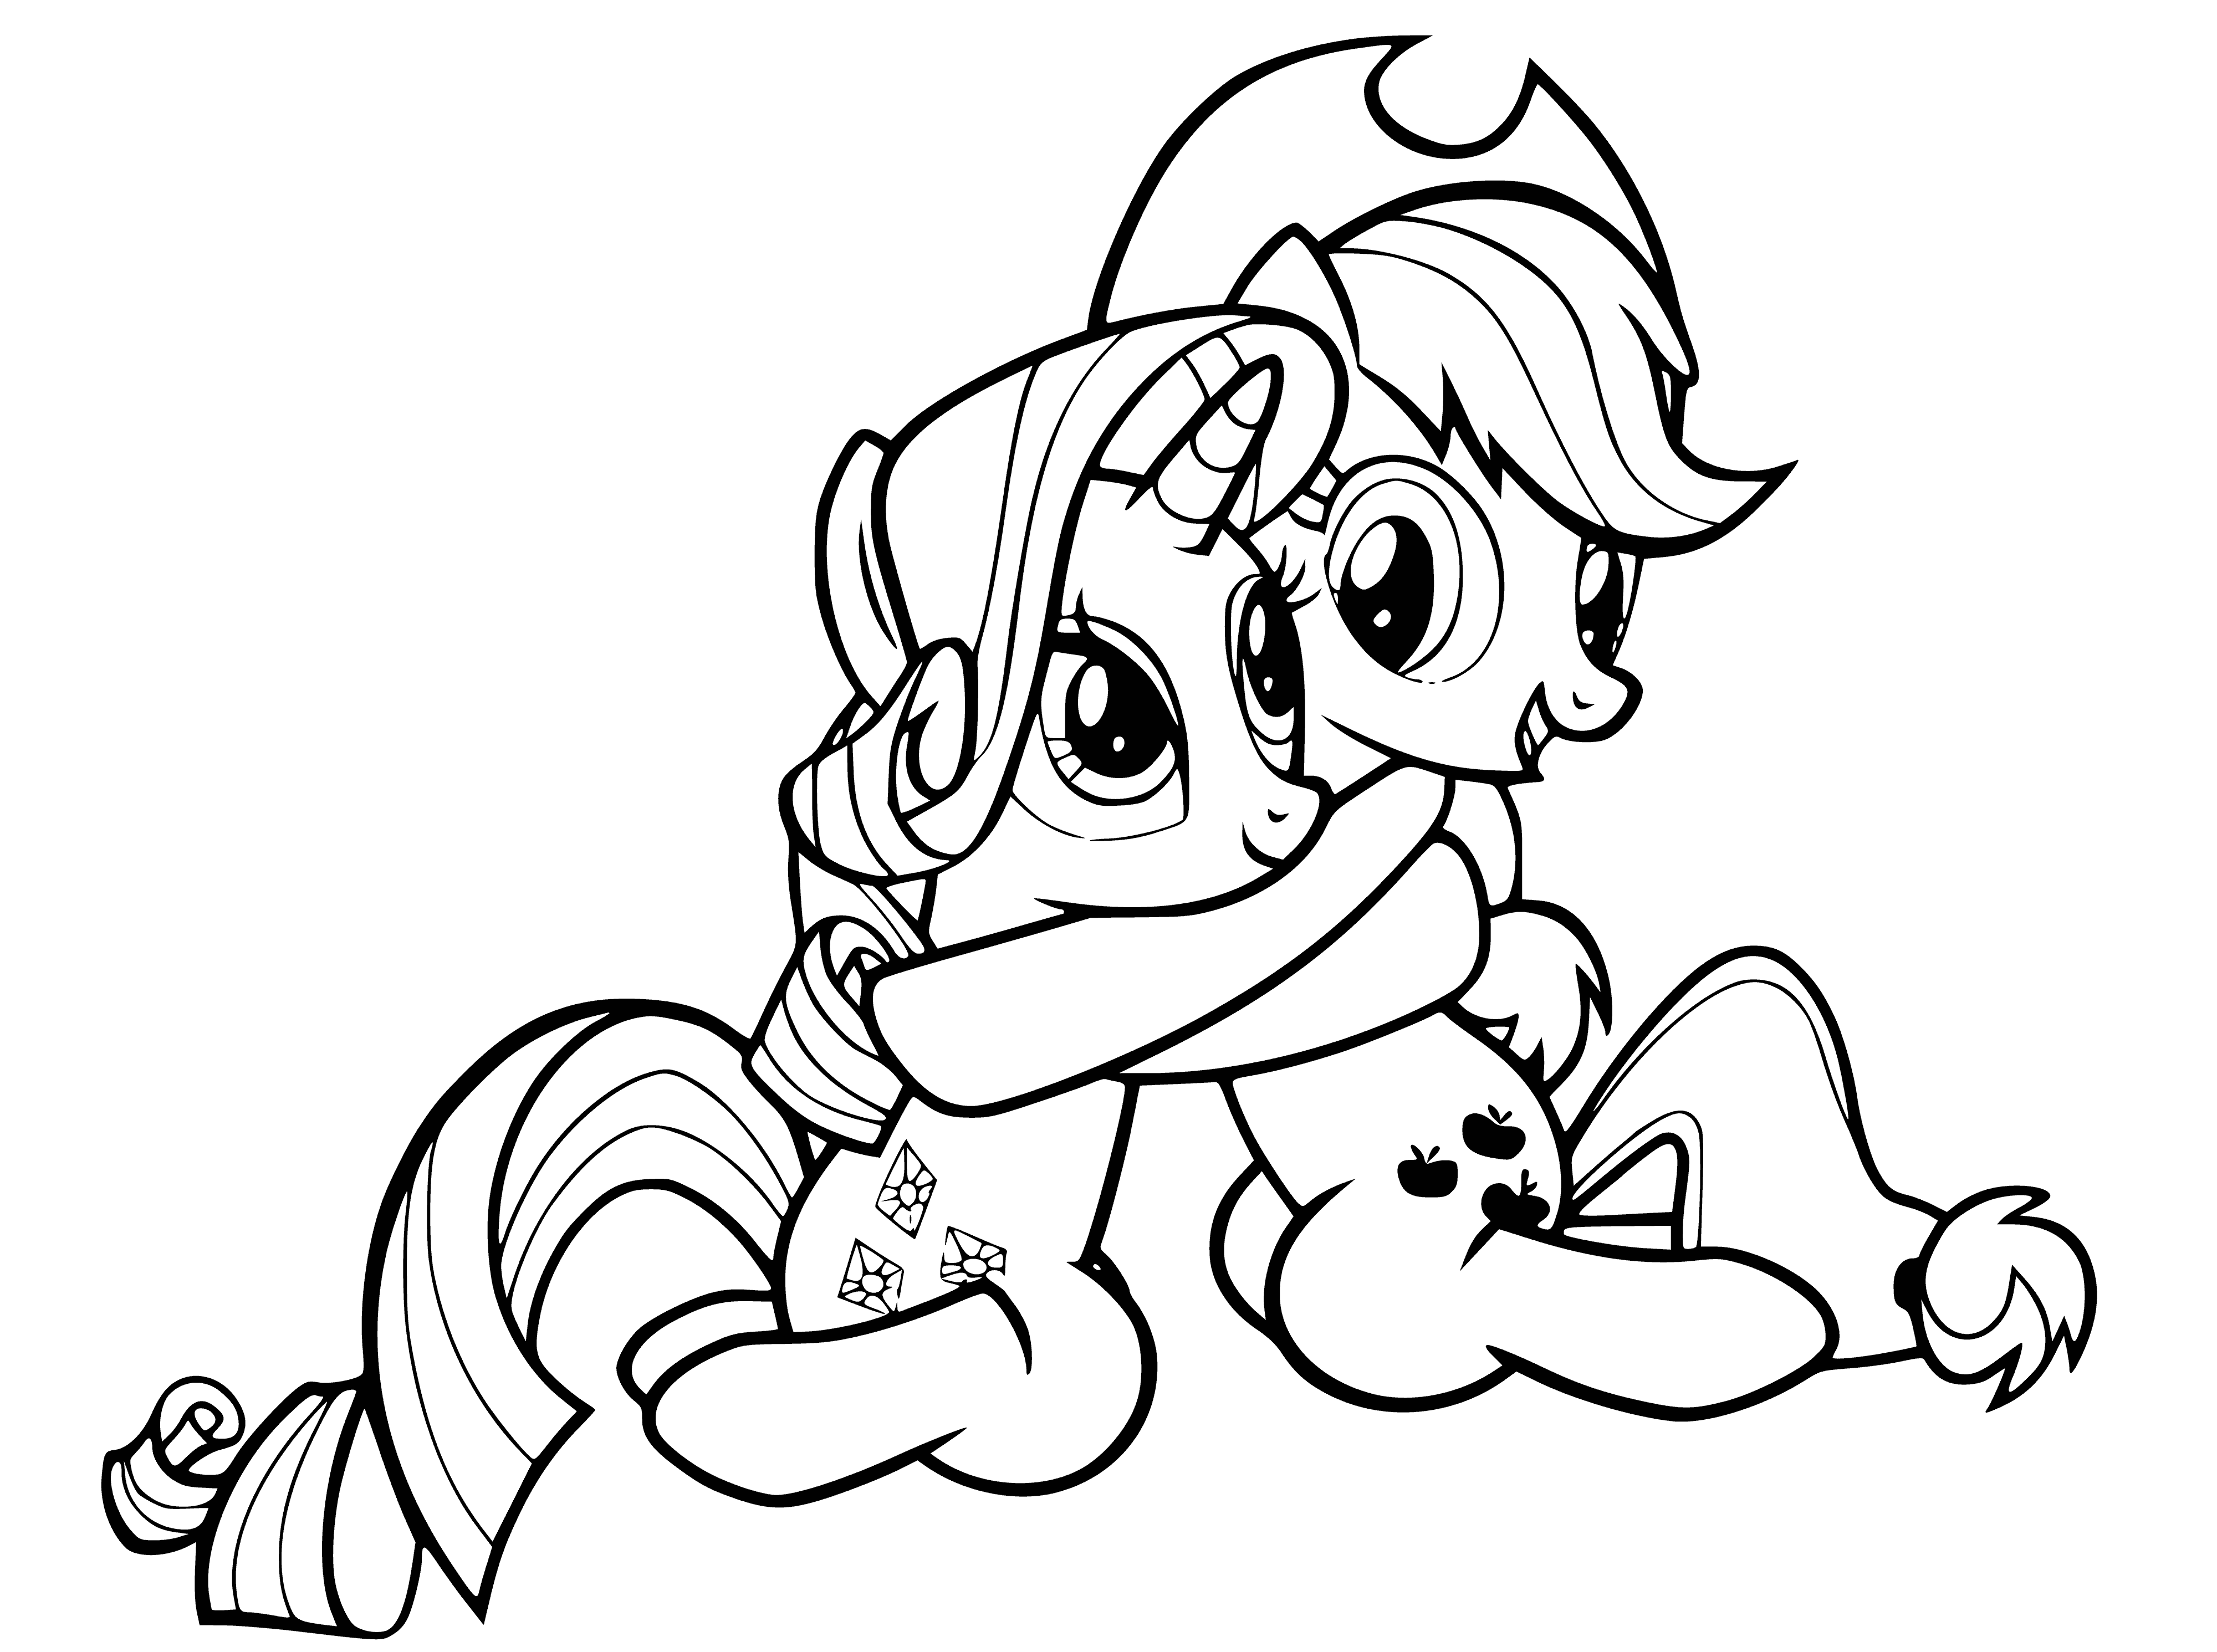 coloring page: Applejack and Rarity are friends; light brown and white, orange and purple manes n tails. They chat, side-by-side.